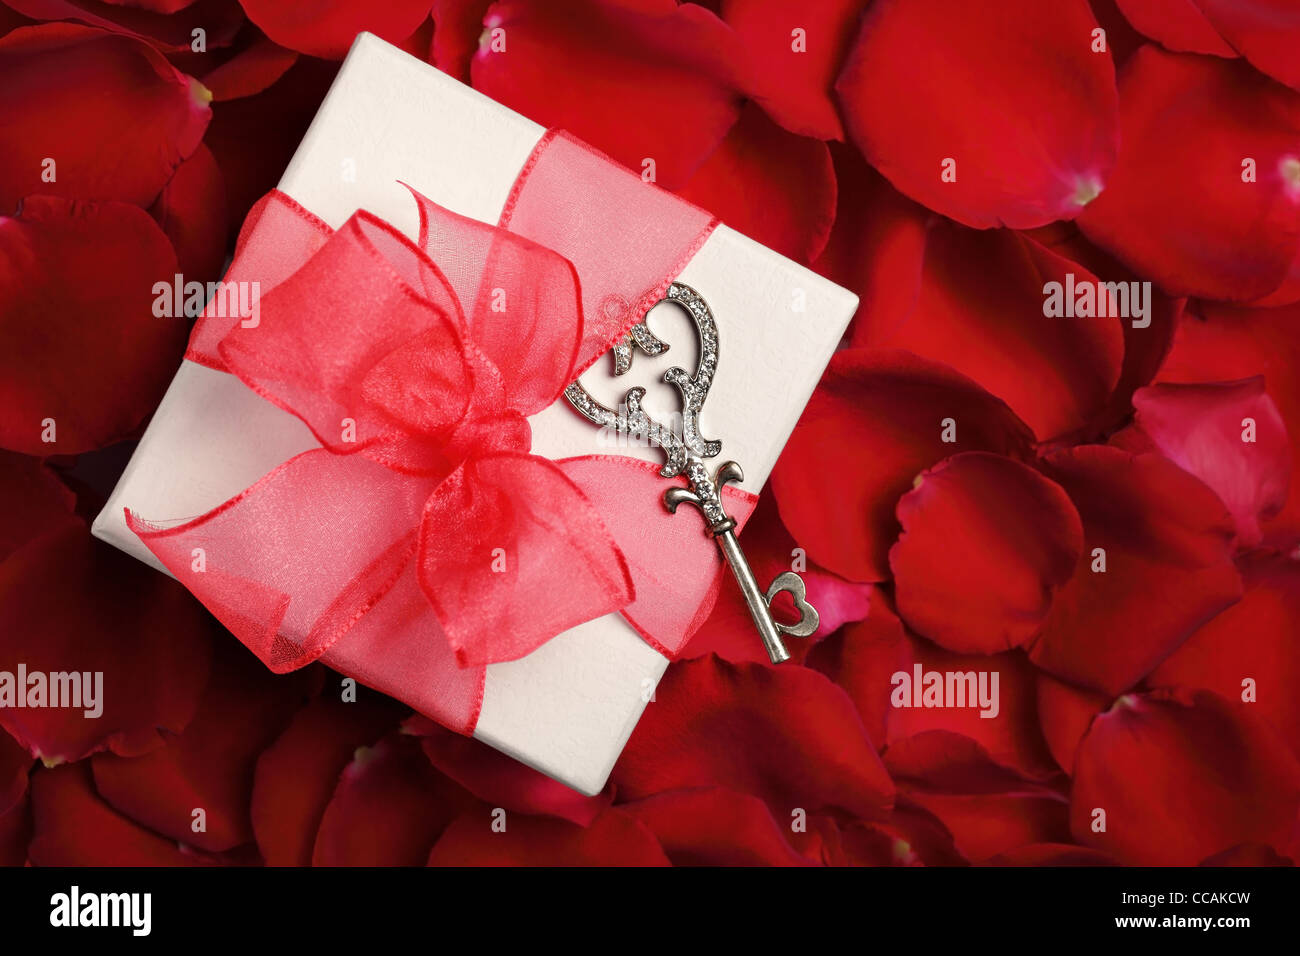 Valentines gift box with key on rose petal background Stock Photo